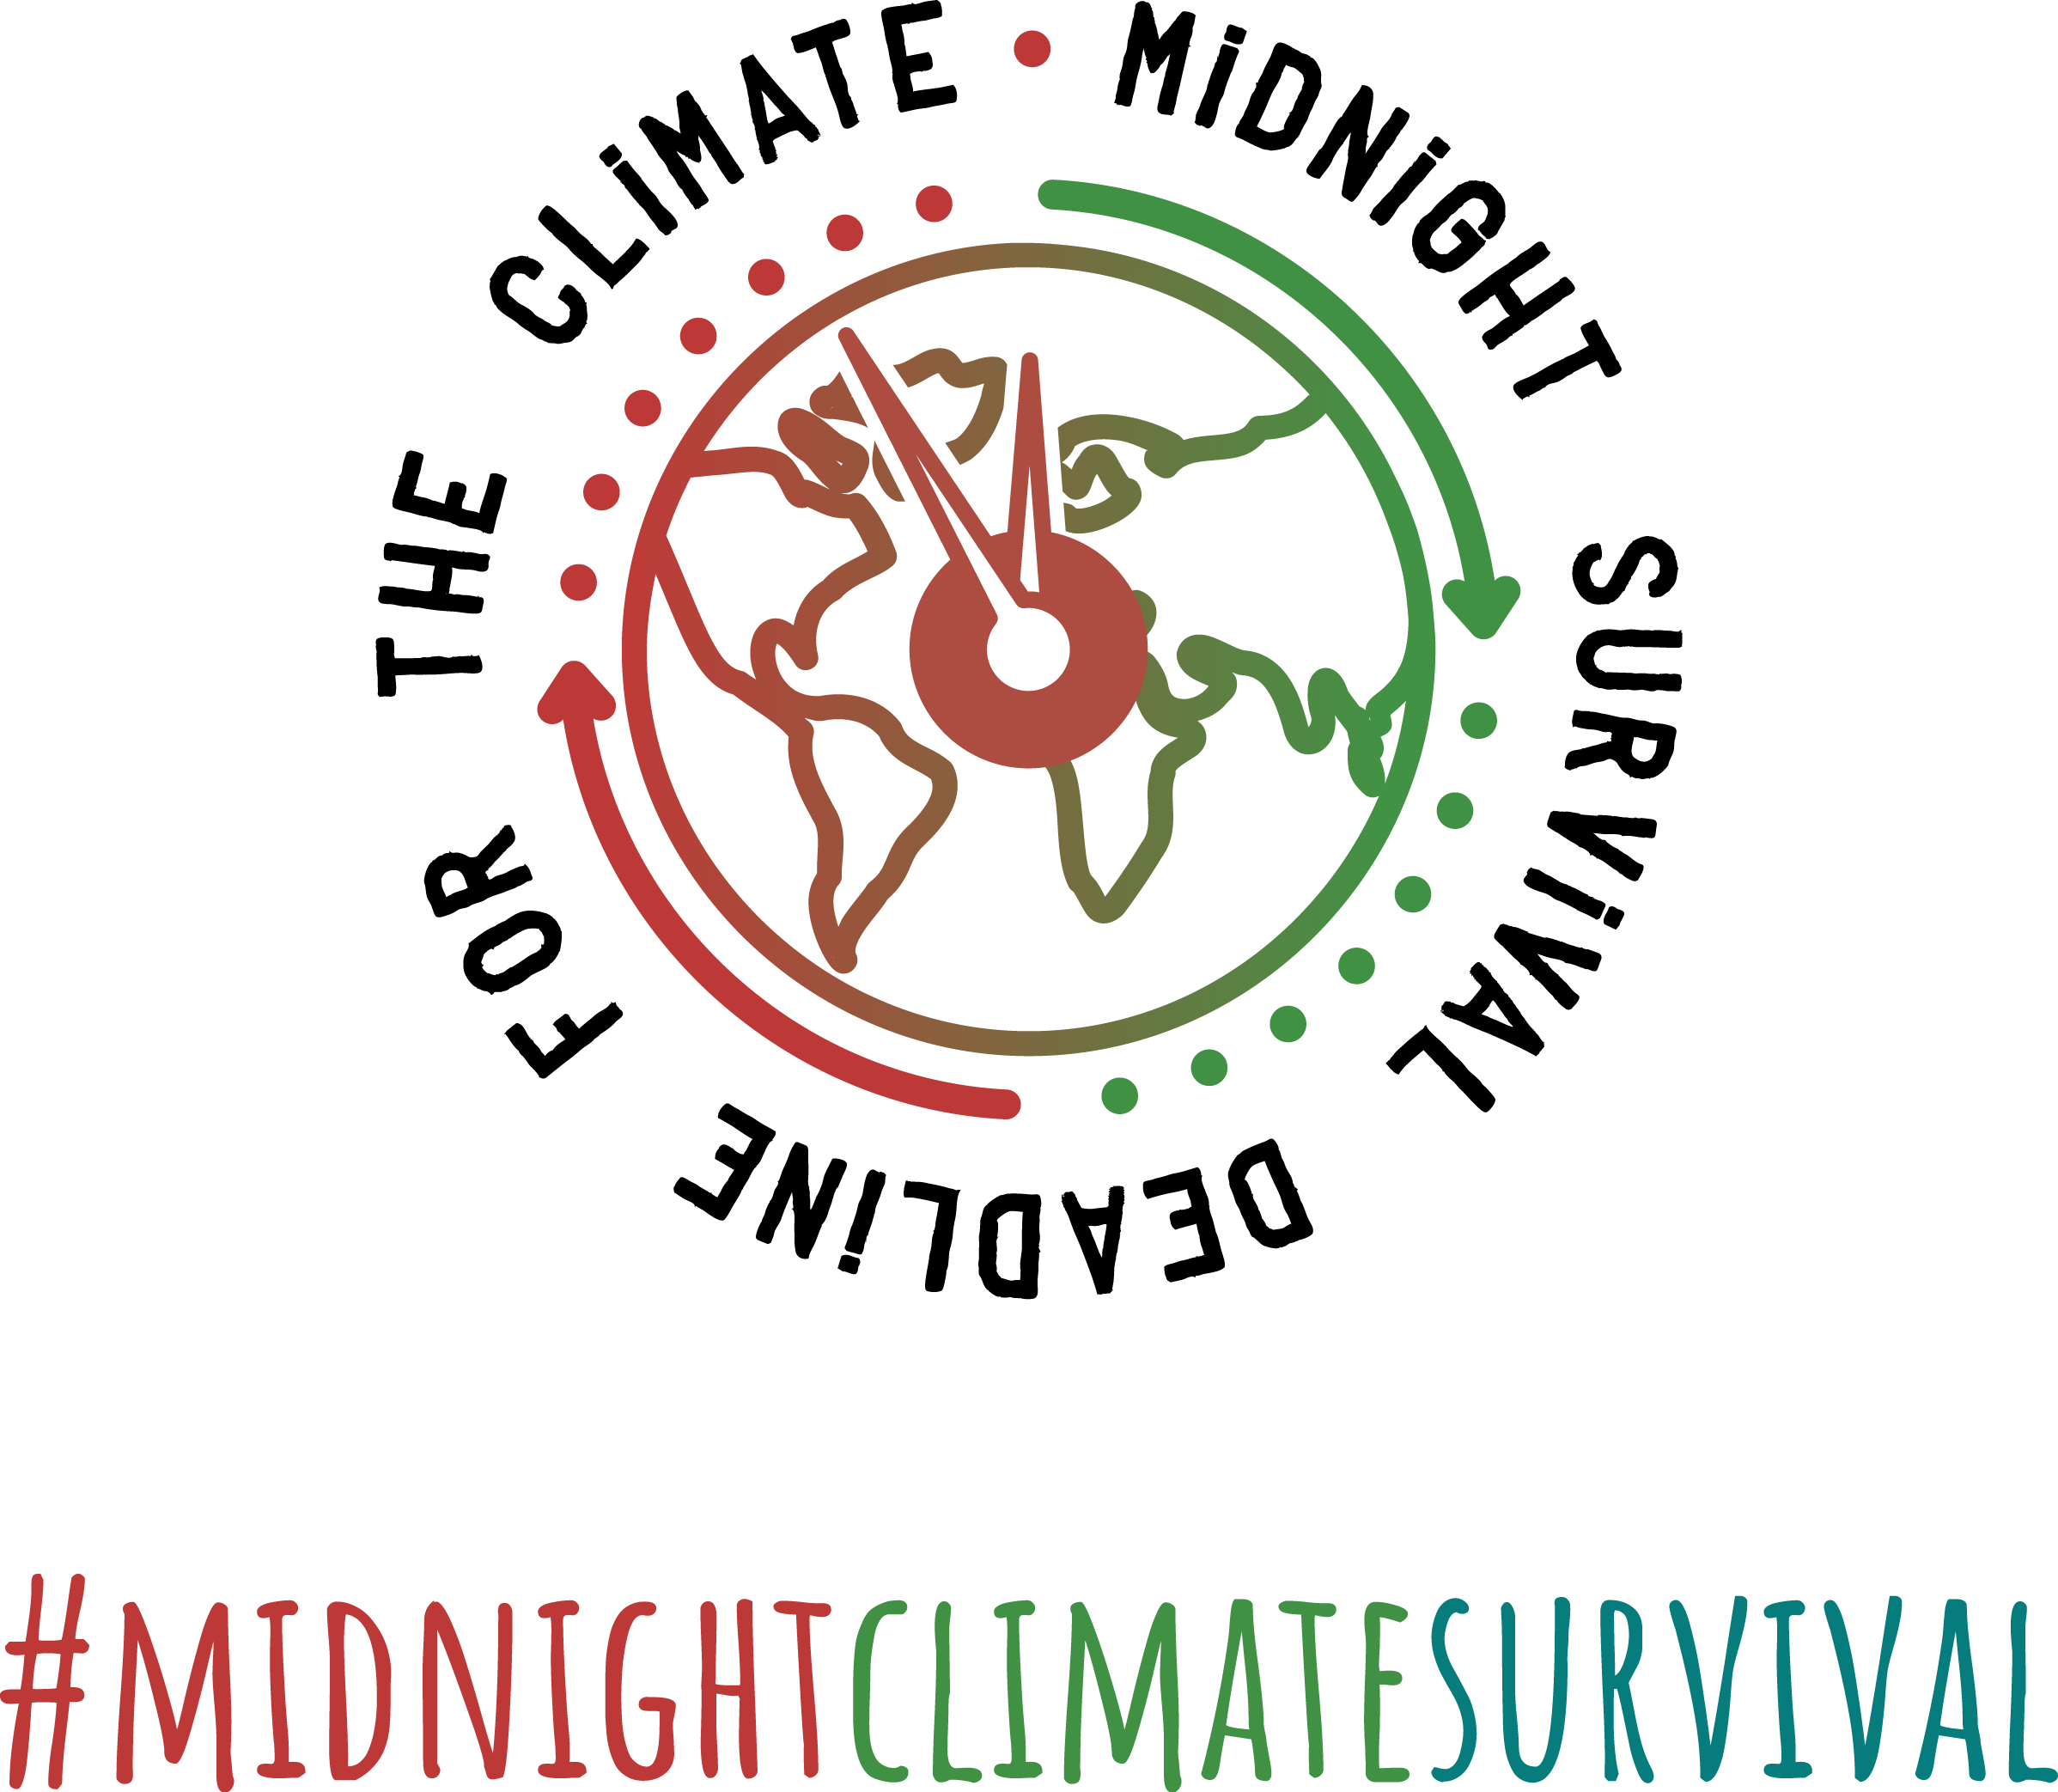 Midnight Climate Survival - V20: The Vulnerable Twenty Group